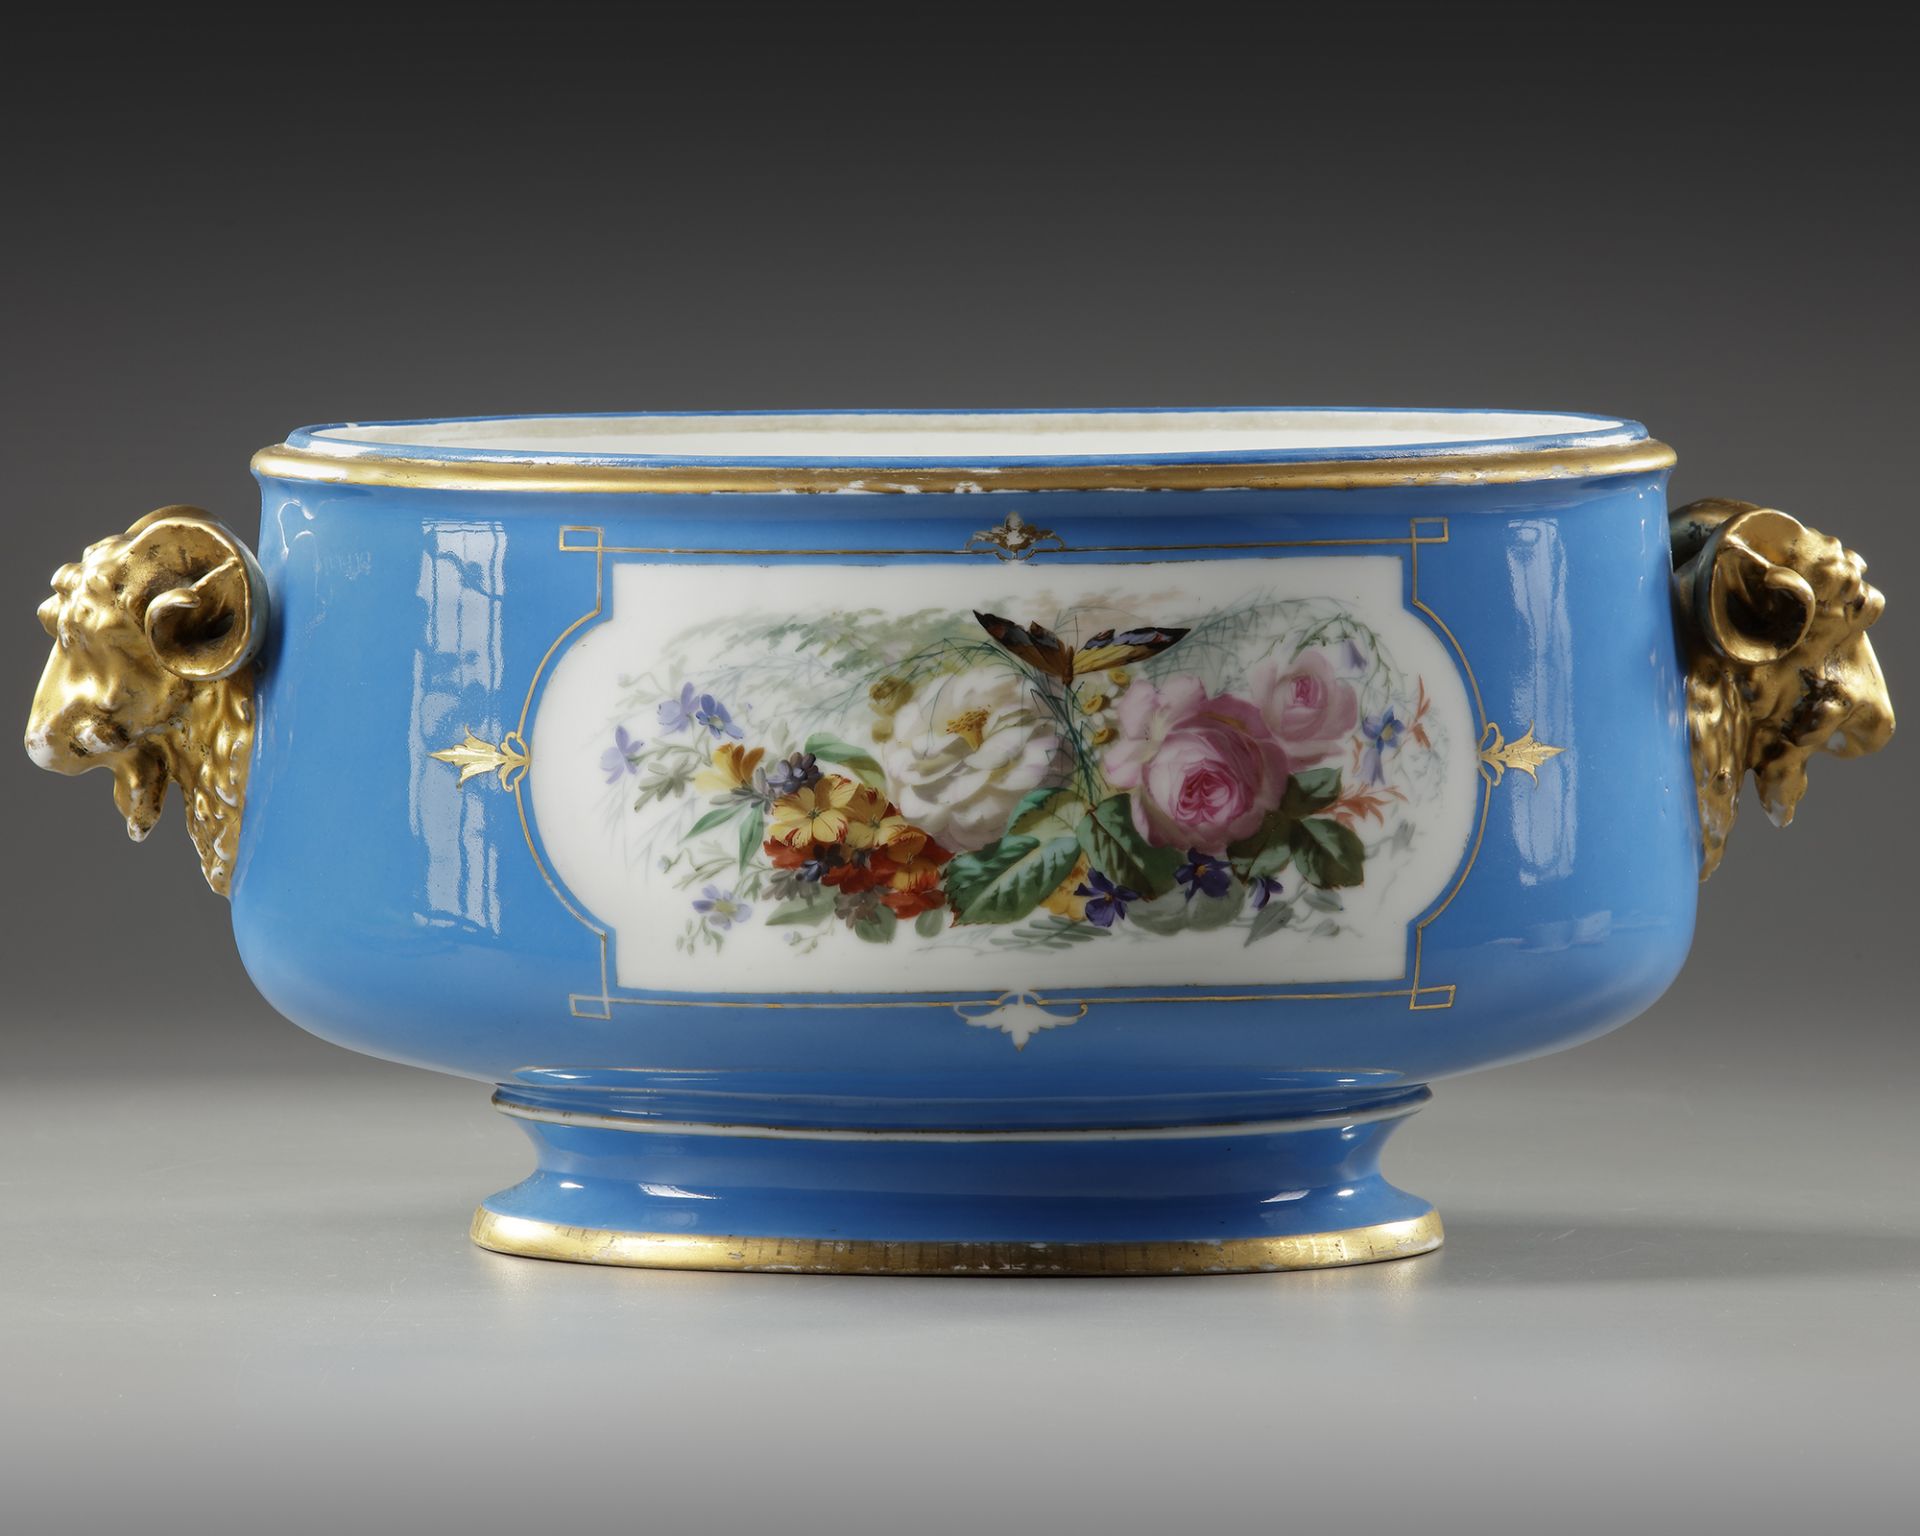 A FRENCH SEVRES PORCELAIN CUP, LATE 19TH CENTURY - Image 2 of 5